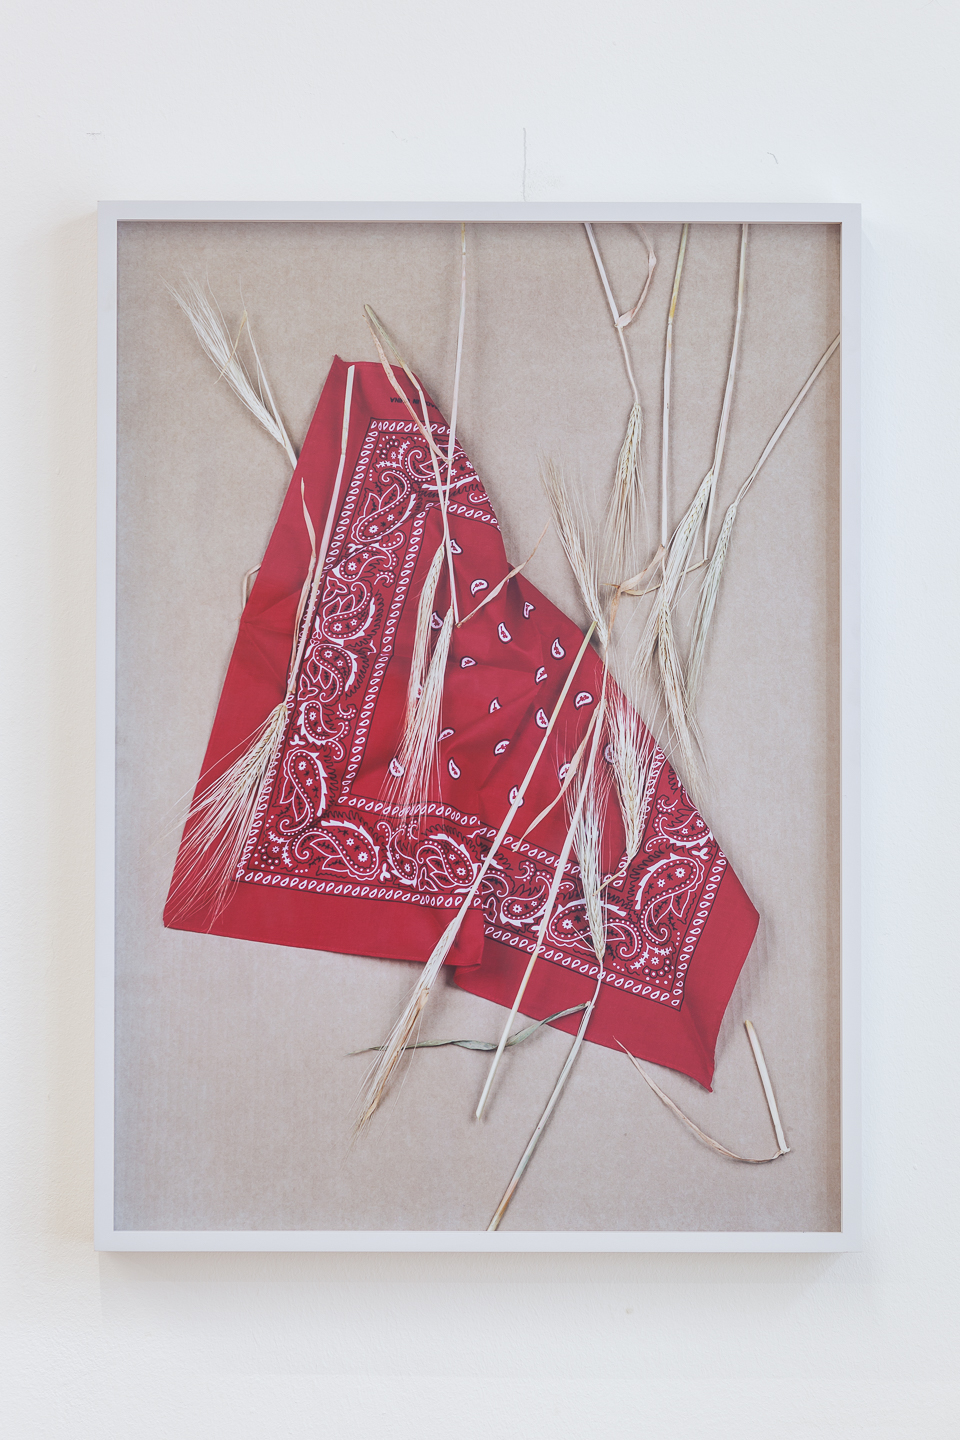 Annette Kelm,Paisey and Wheat Red, 2013C-print, framed, 59,0 x 42,8 cmEdition 4/6 + 2 AP